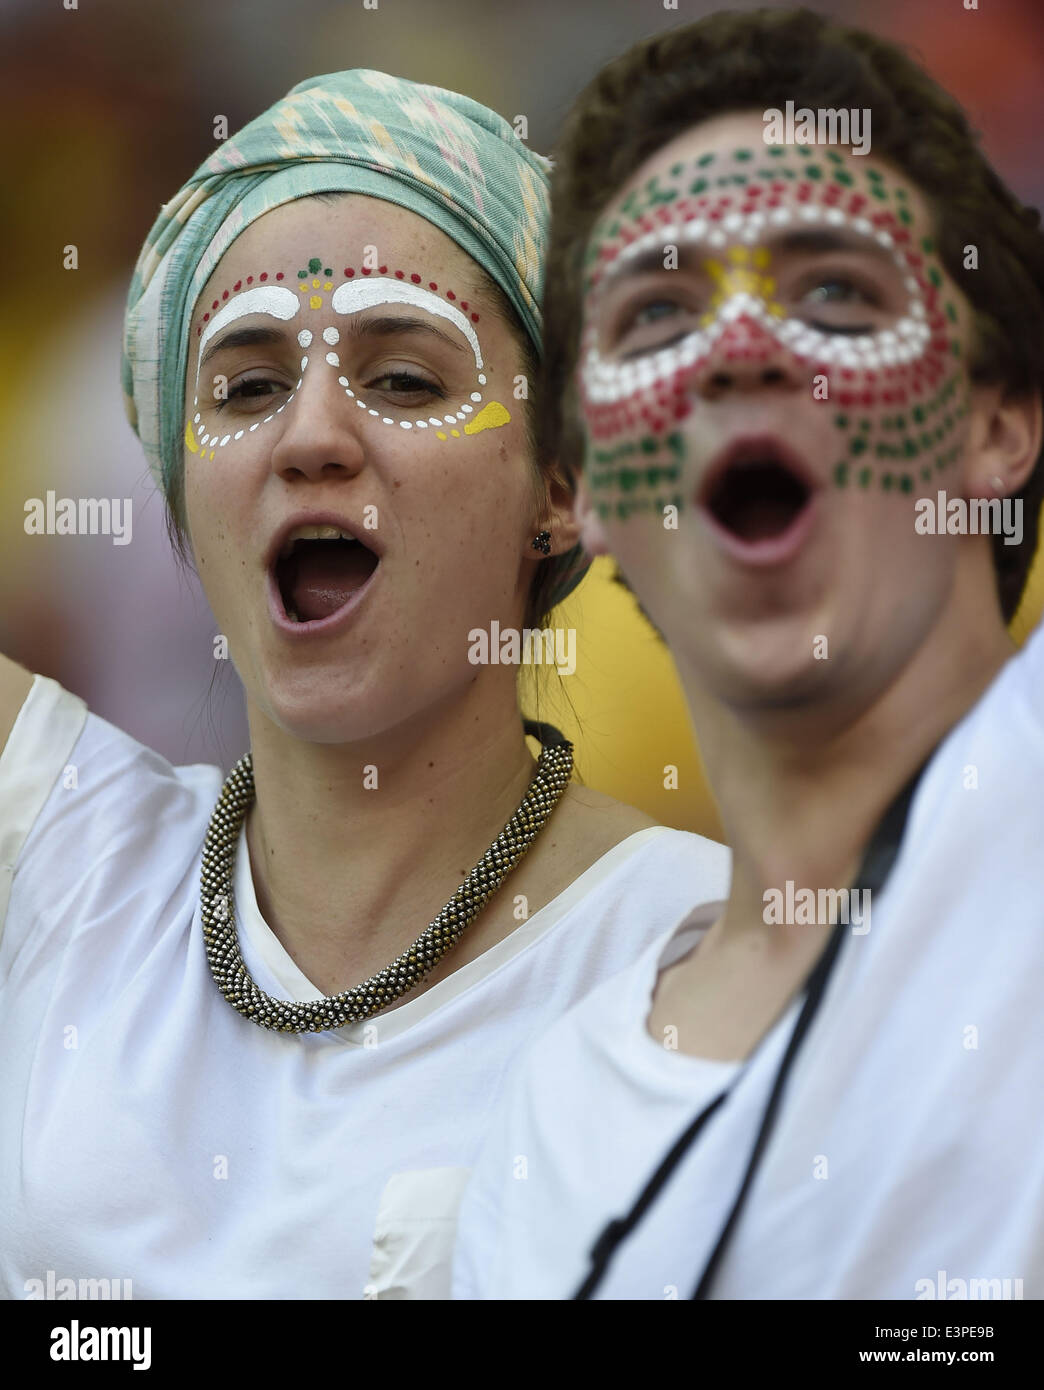 Brasilia, Brazil. 26th June, 2014. Portugal's fans cheer prior to a Group G match between Portugal and Ghana of 2014 FIFA World Cup at the Estadio Nacional Stadium in Brasilia, Brazil, June 26, 2014. © Qi Heng/Xinhua/Alamy Live News Stock Photo